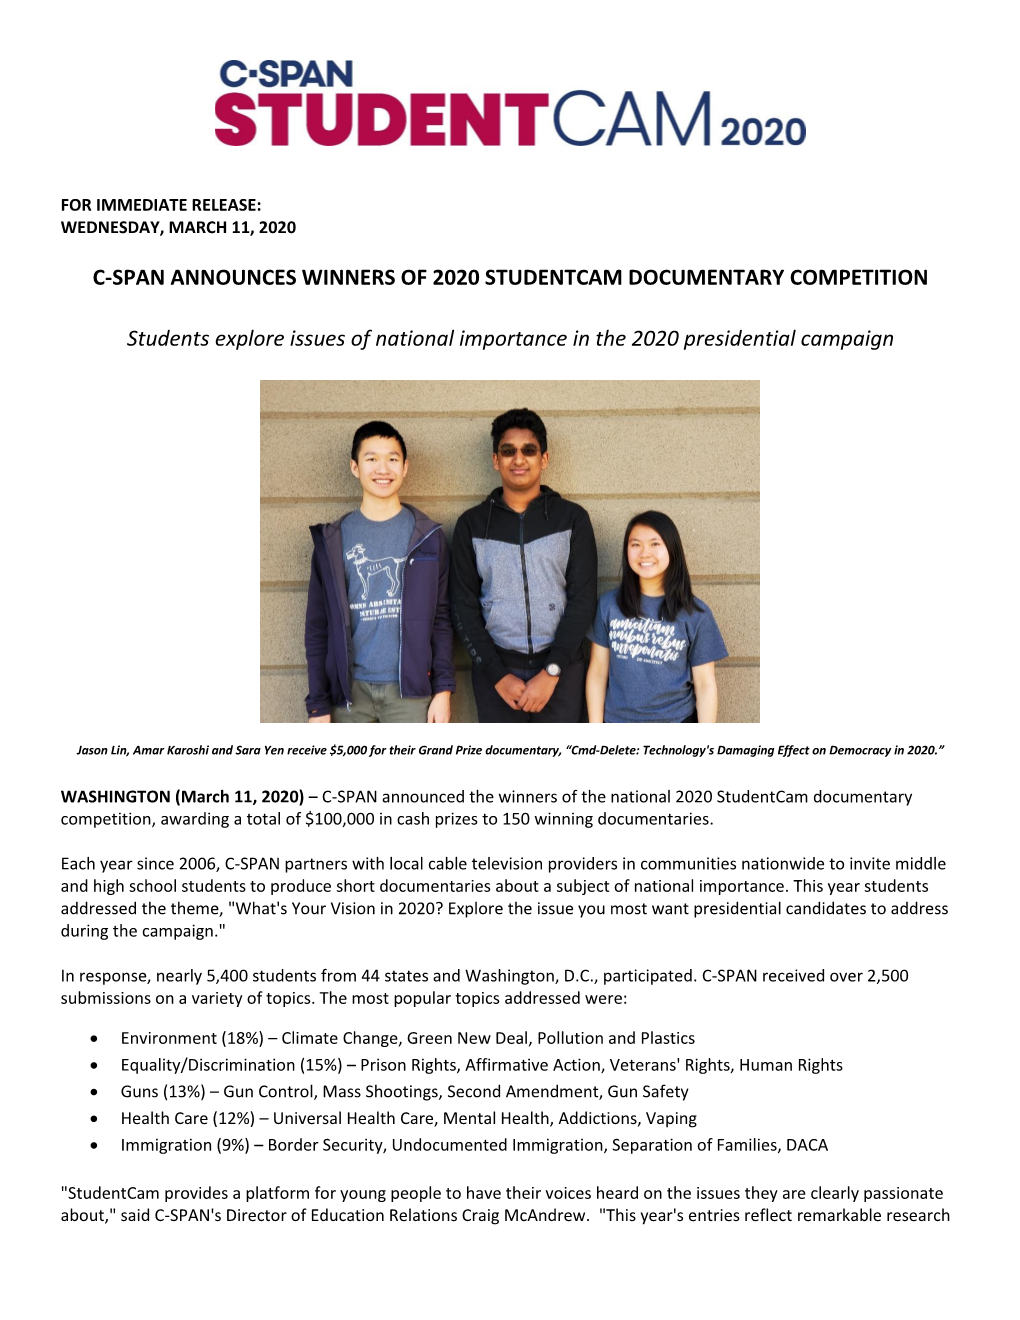 C-Span Announces Winners of 2020 Studentcam Documentary Competition